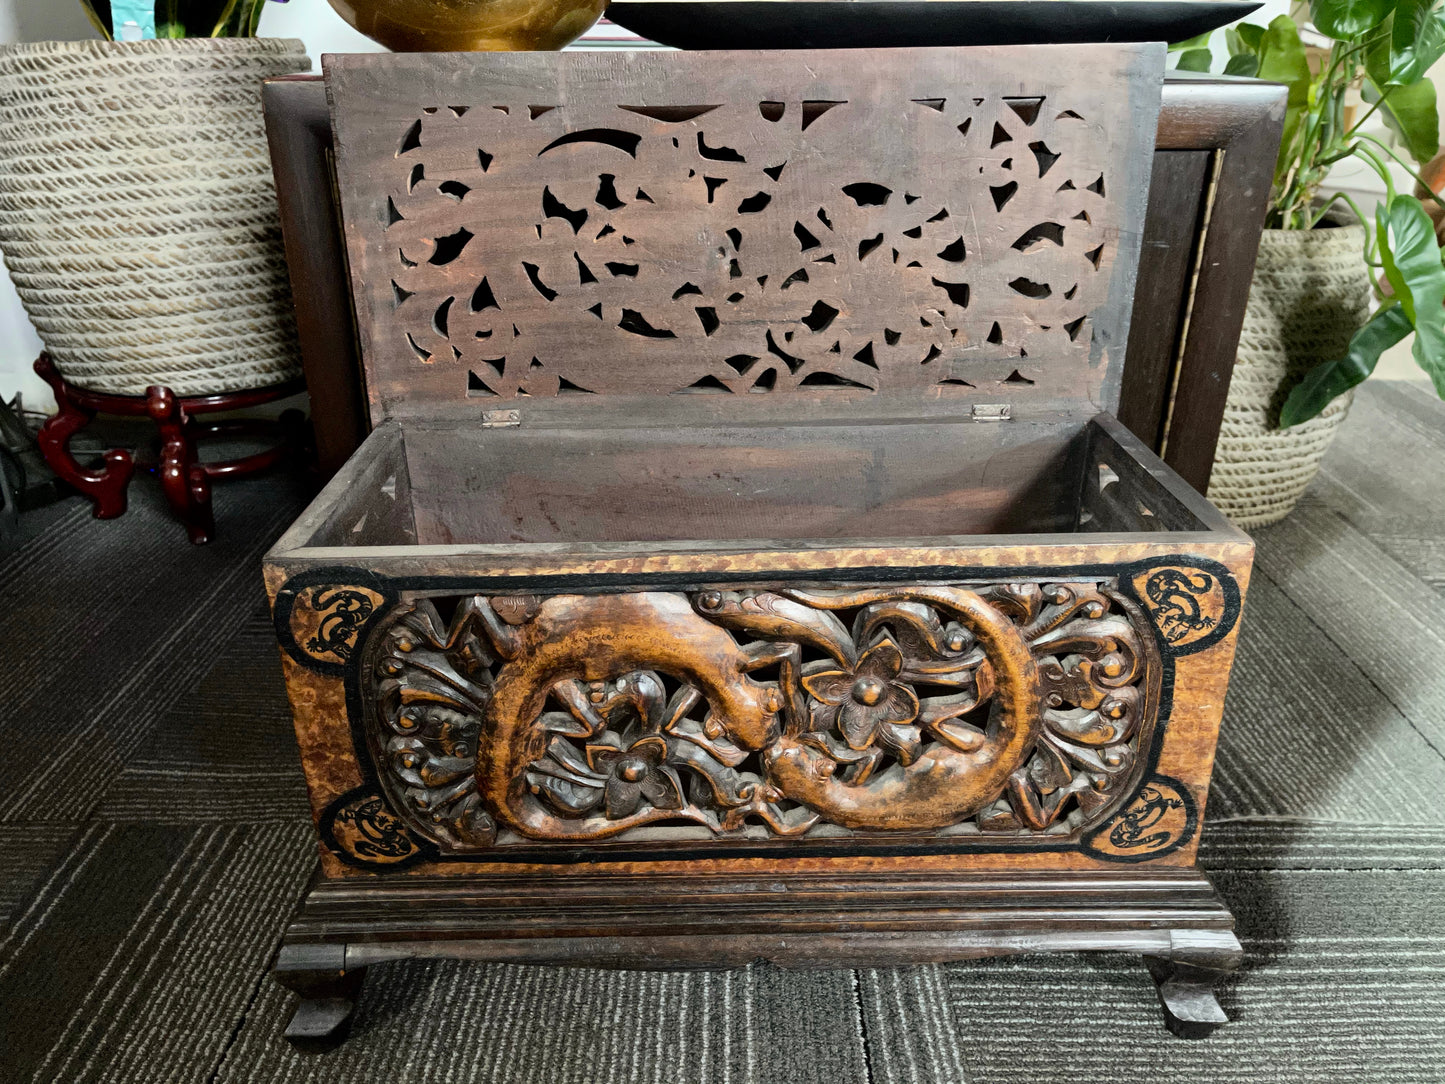 FABULOUS Vintage Ornate Trunk from Indonesia, Old World Vintage